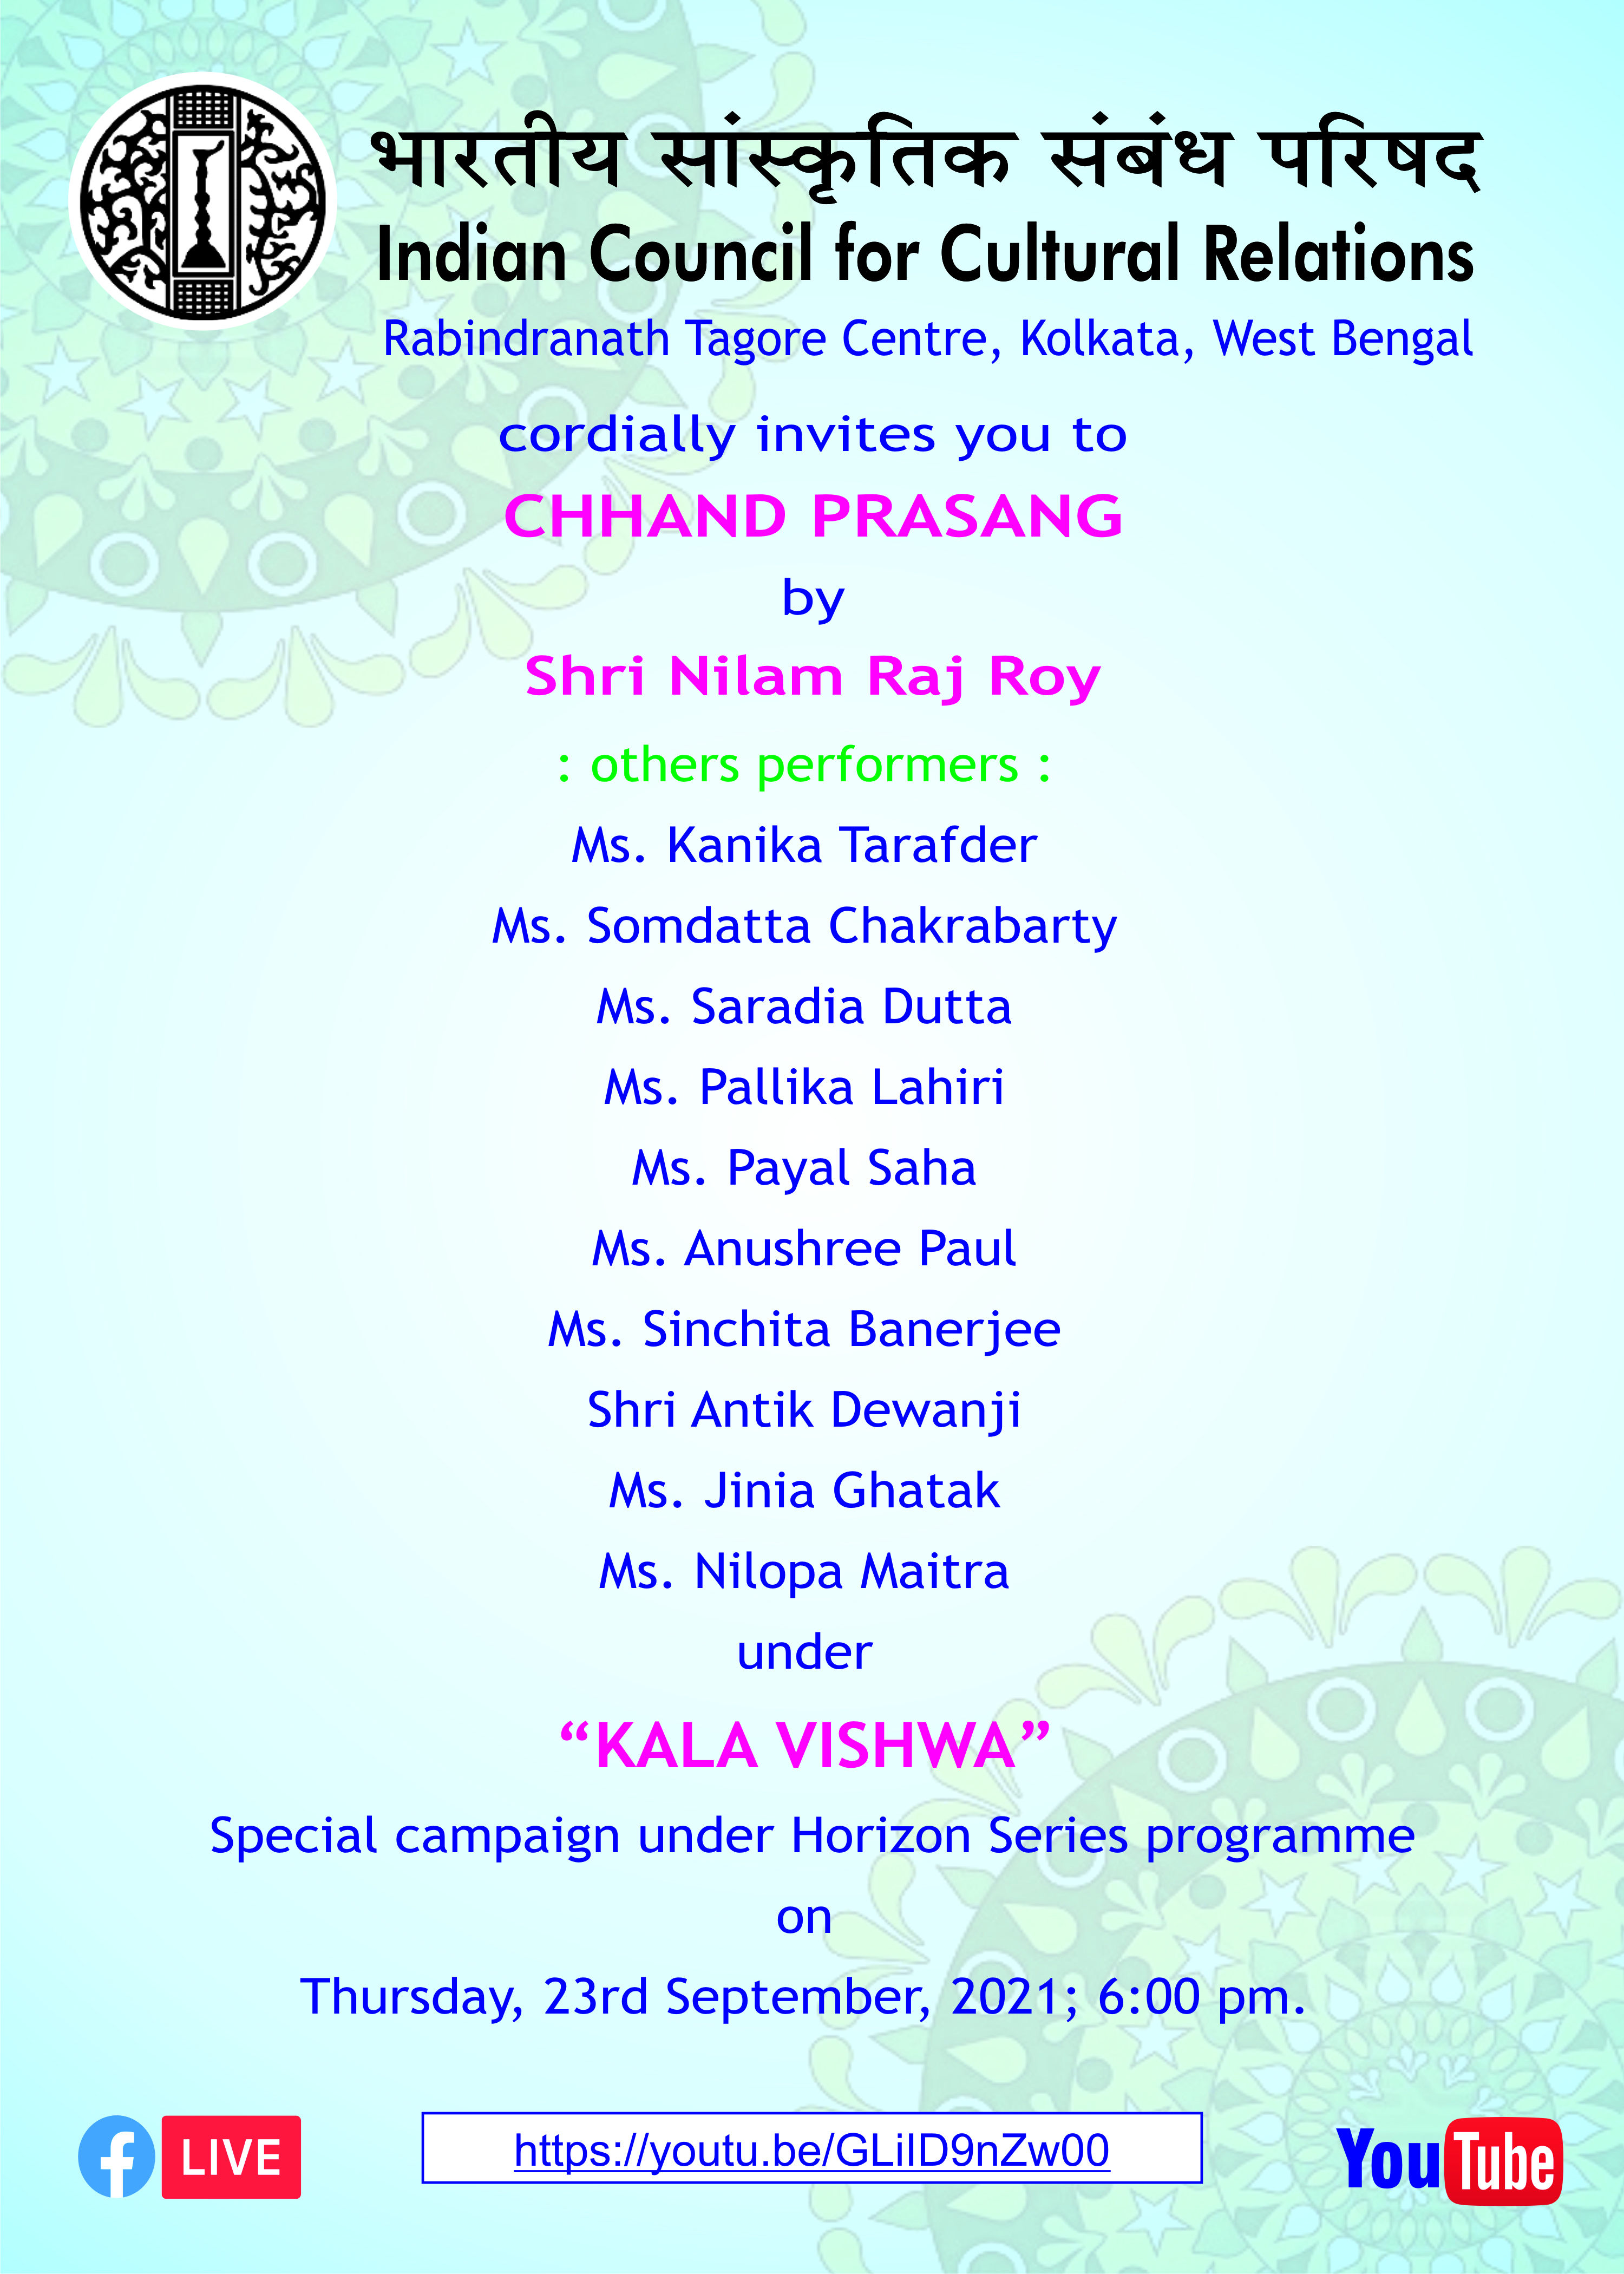 The Indian Council for Cultural Relations (ICCR), Regional Office, Kolkata cordially invites you to the "KALA VISHWA" : A Special campaign under Horizon Series "CHHAND PRASANG" by SHRI. NILAM RAJ ROY on Thursday, 23rd September, 2021 at 6.00 pm.